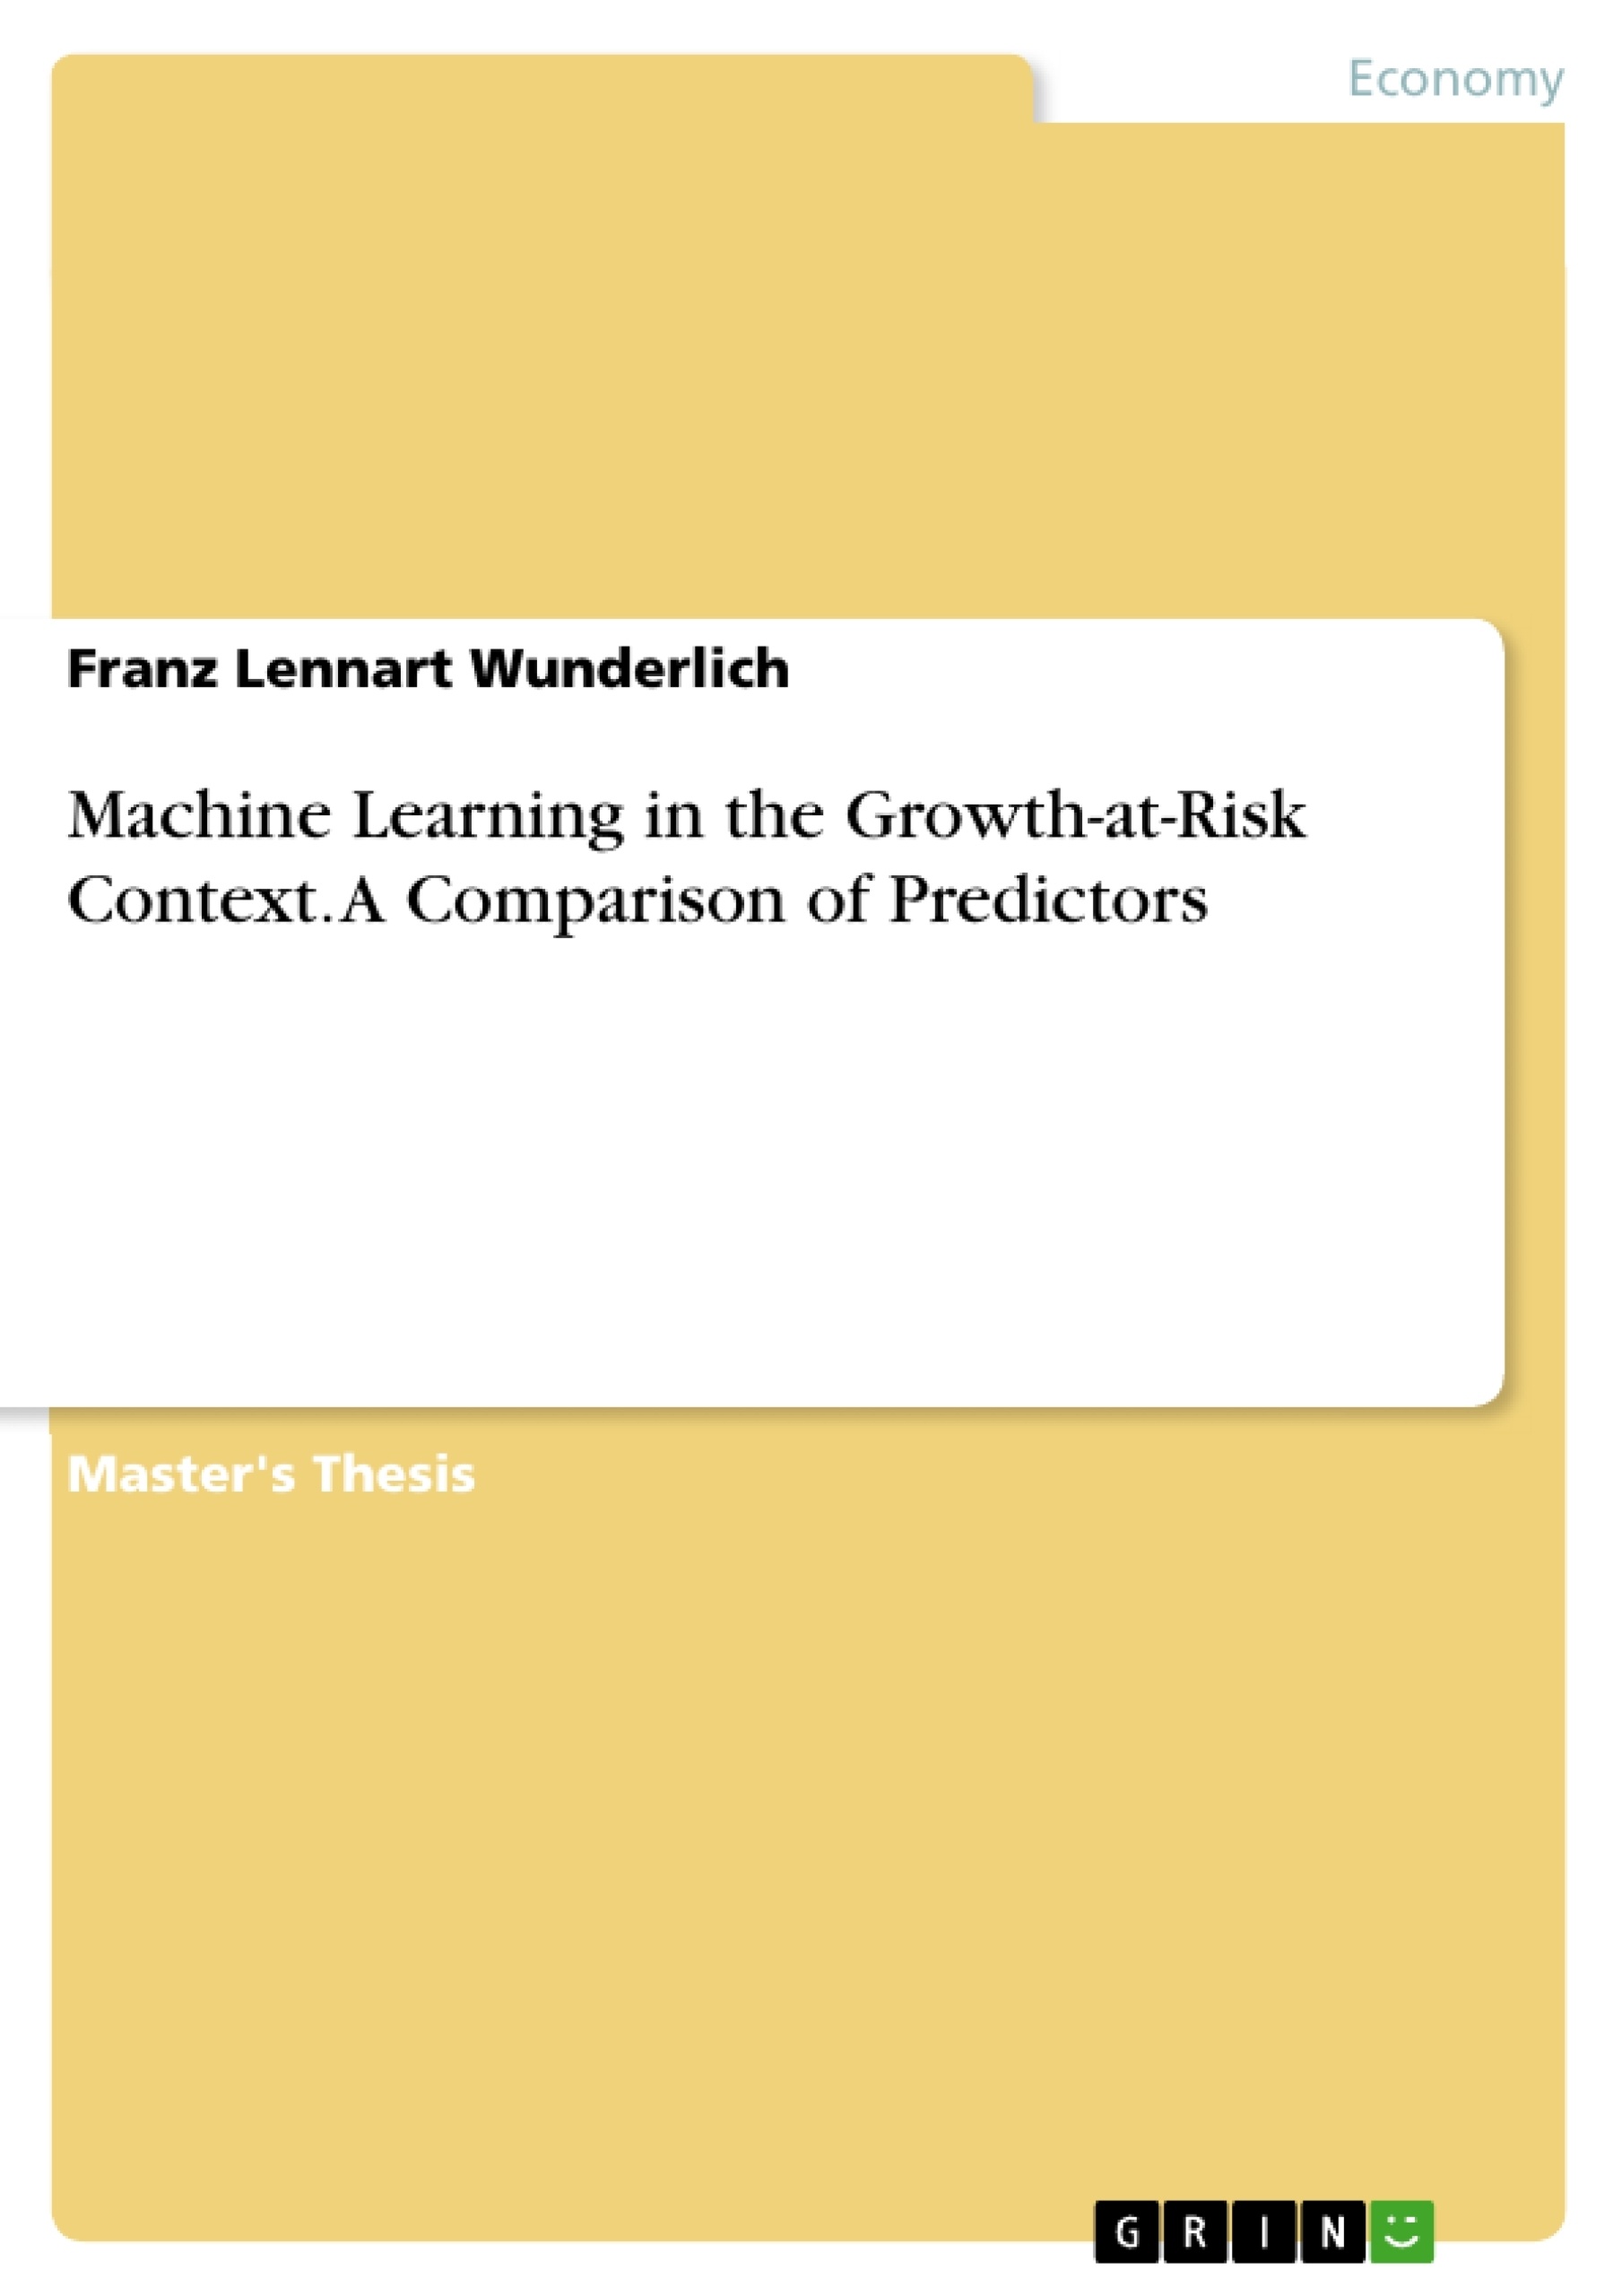 Titel: Machine Learning in the Growth-at-Risk Context. A Comparison of Predictors